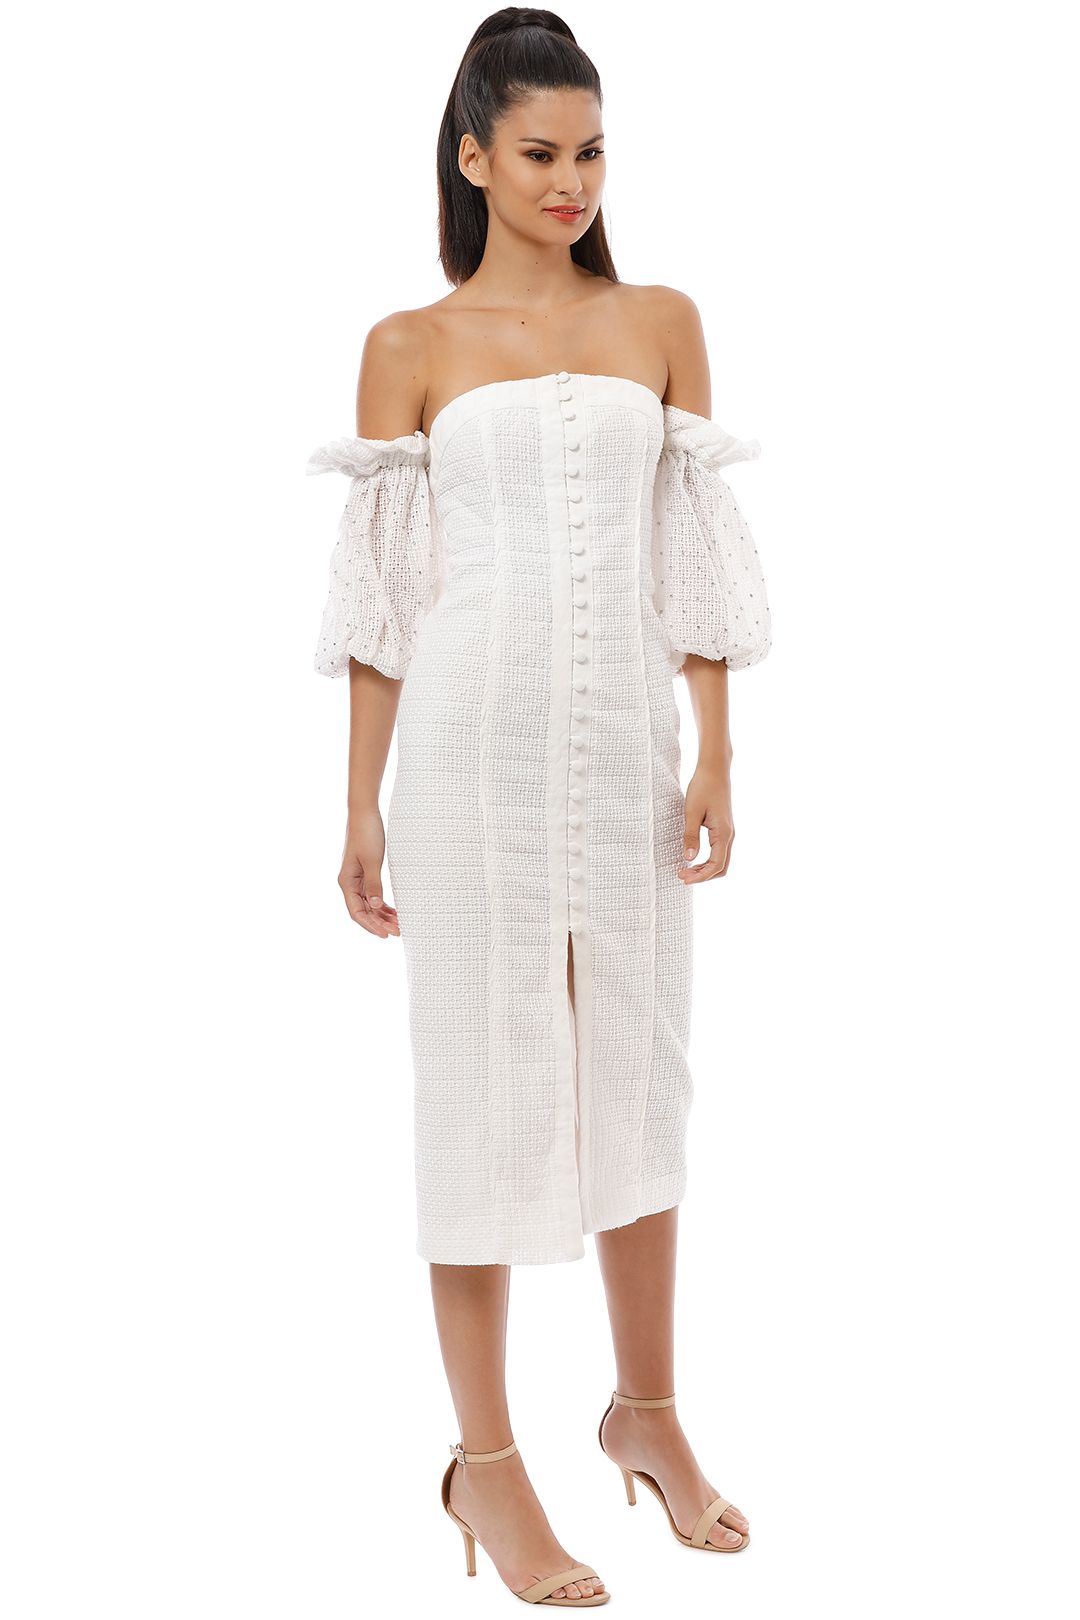 CMEO Collective - Think About Me Midi Dress - Ivory - Front